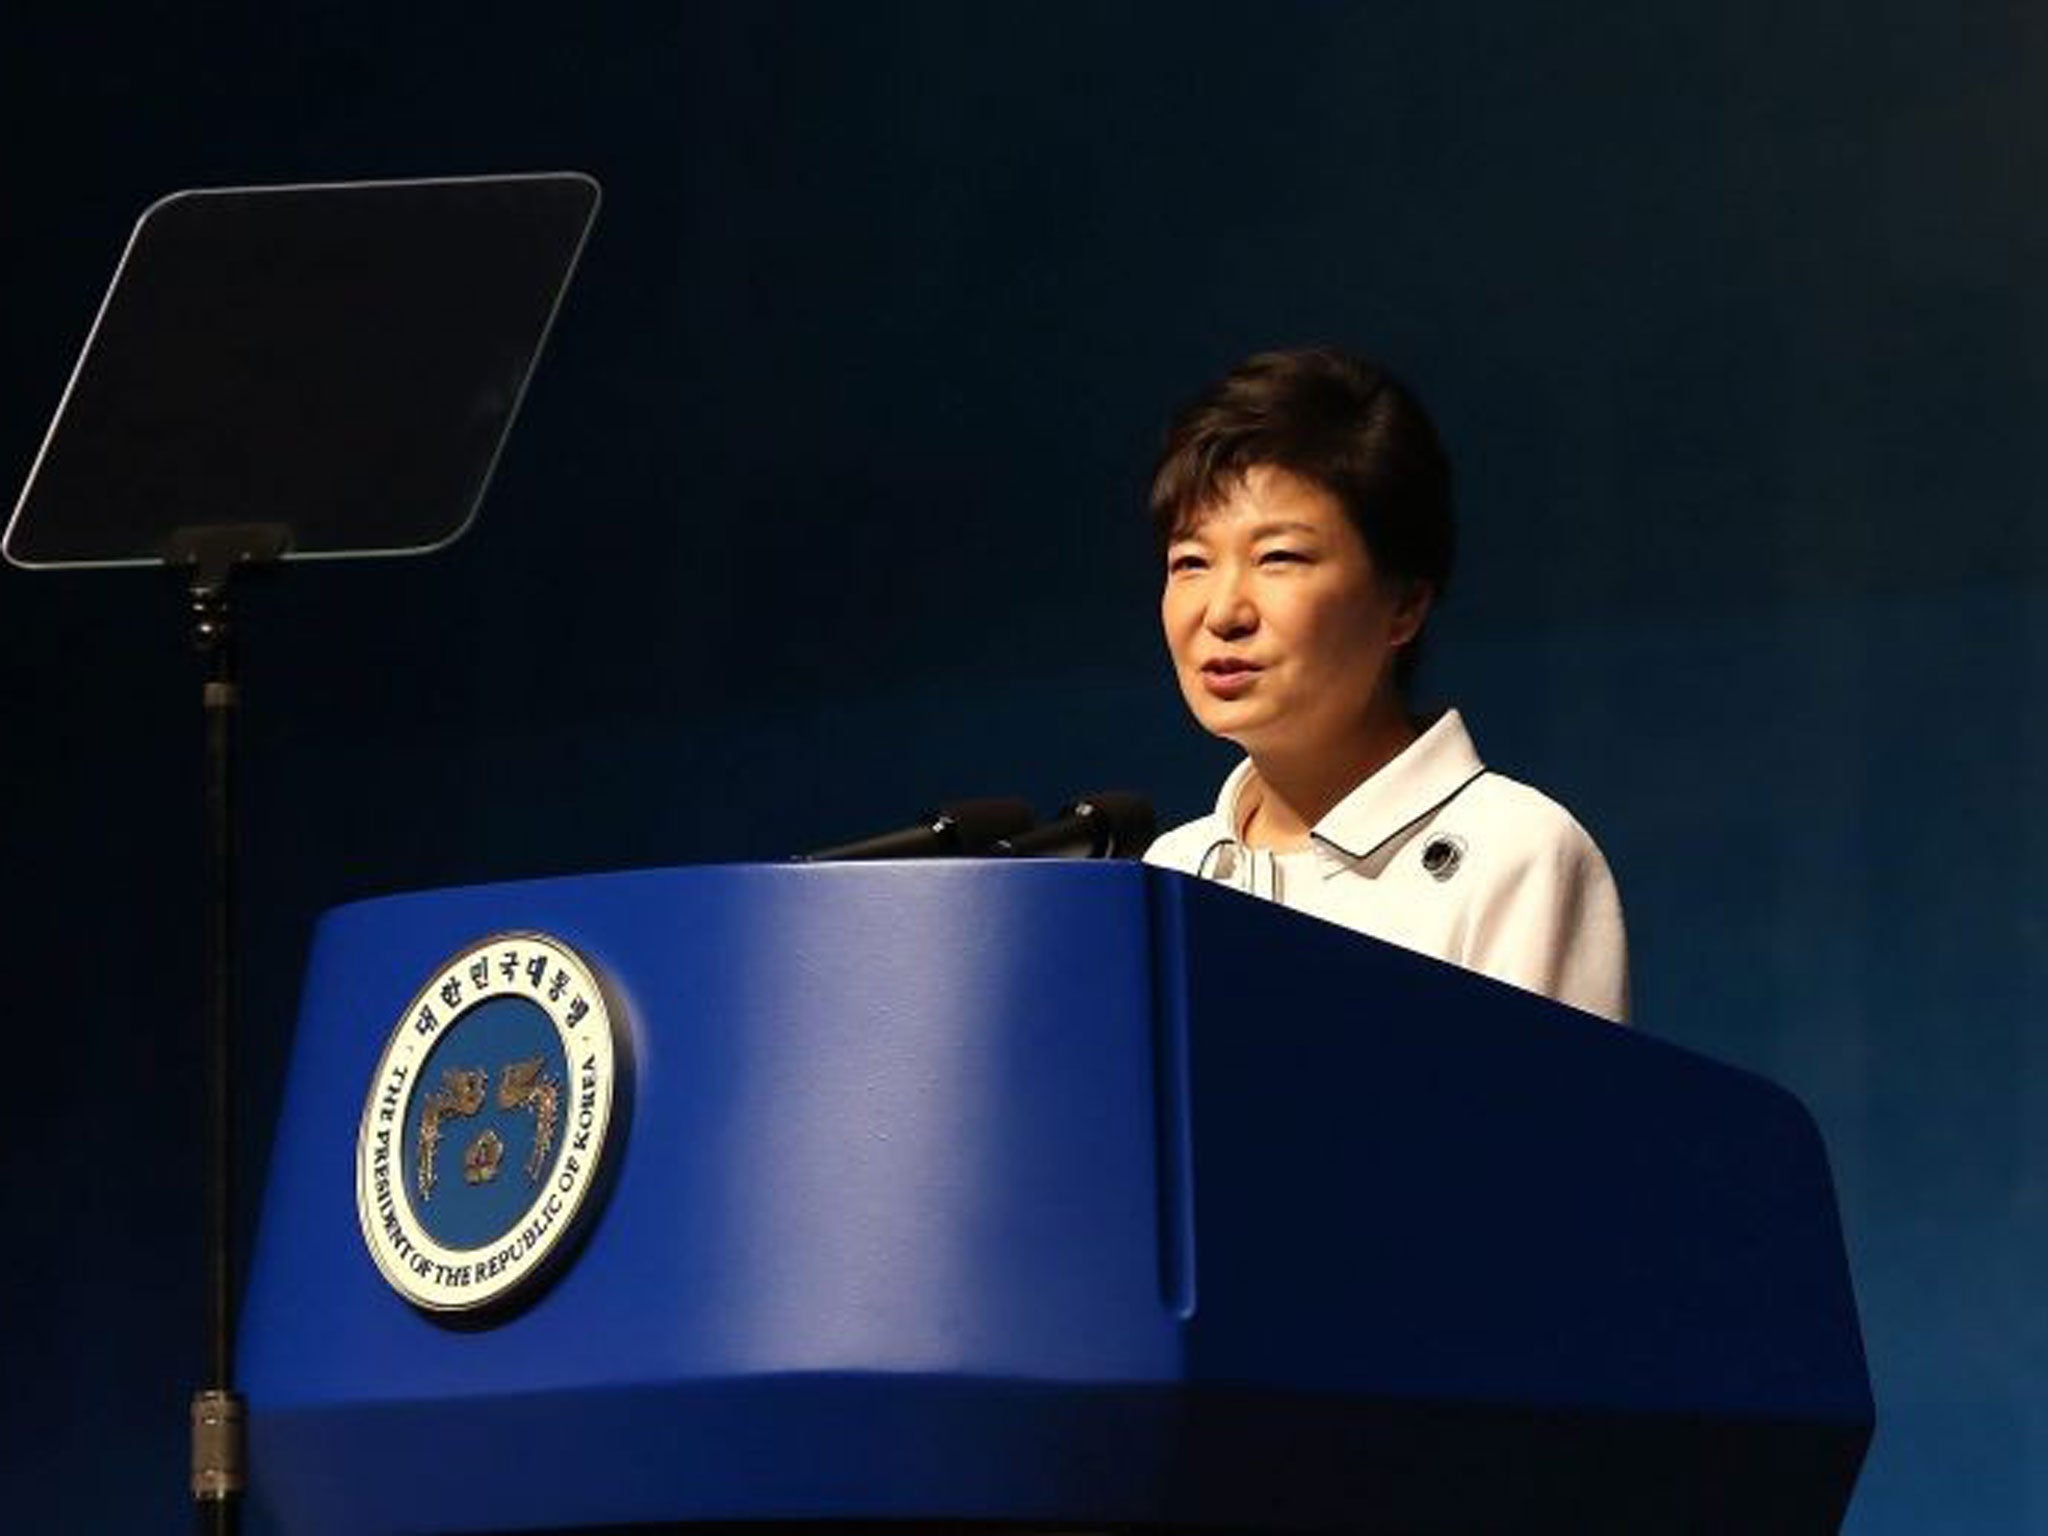 South Korean President Park Geun Hye called for the resumption of inter-Korean family reunions on 15 August, amid hopes for improved ties with the North.